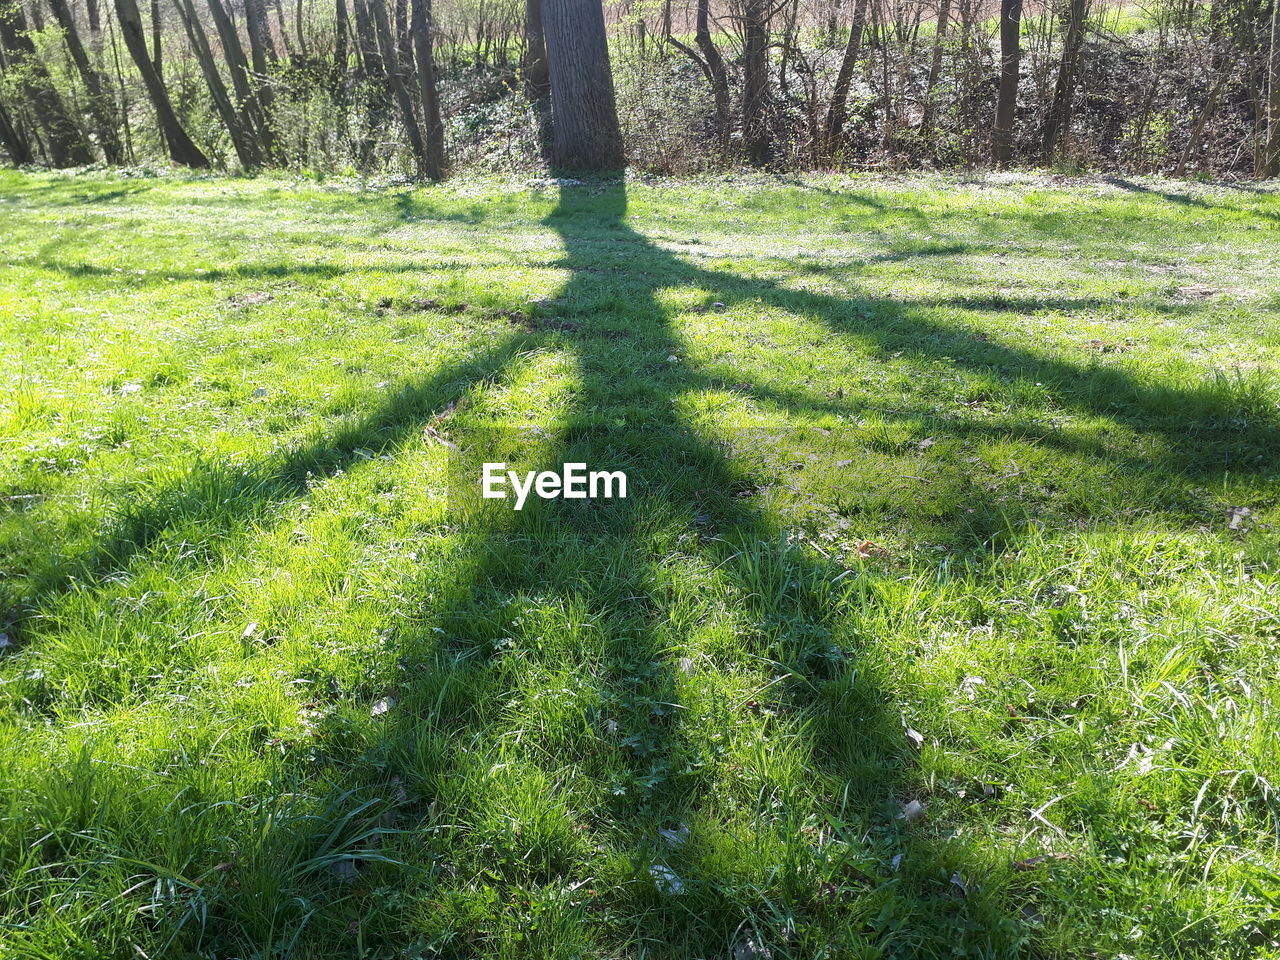 SHADOW OF TREE ON GRASS